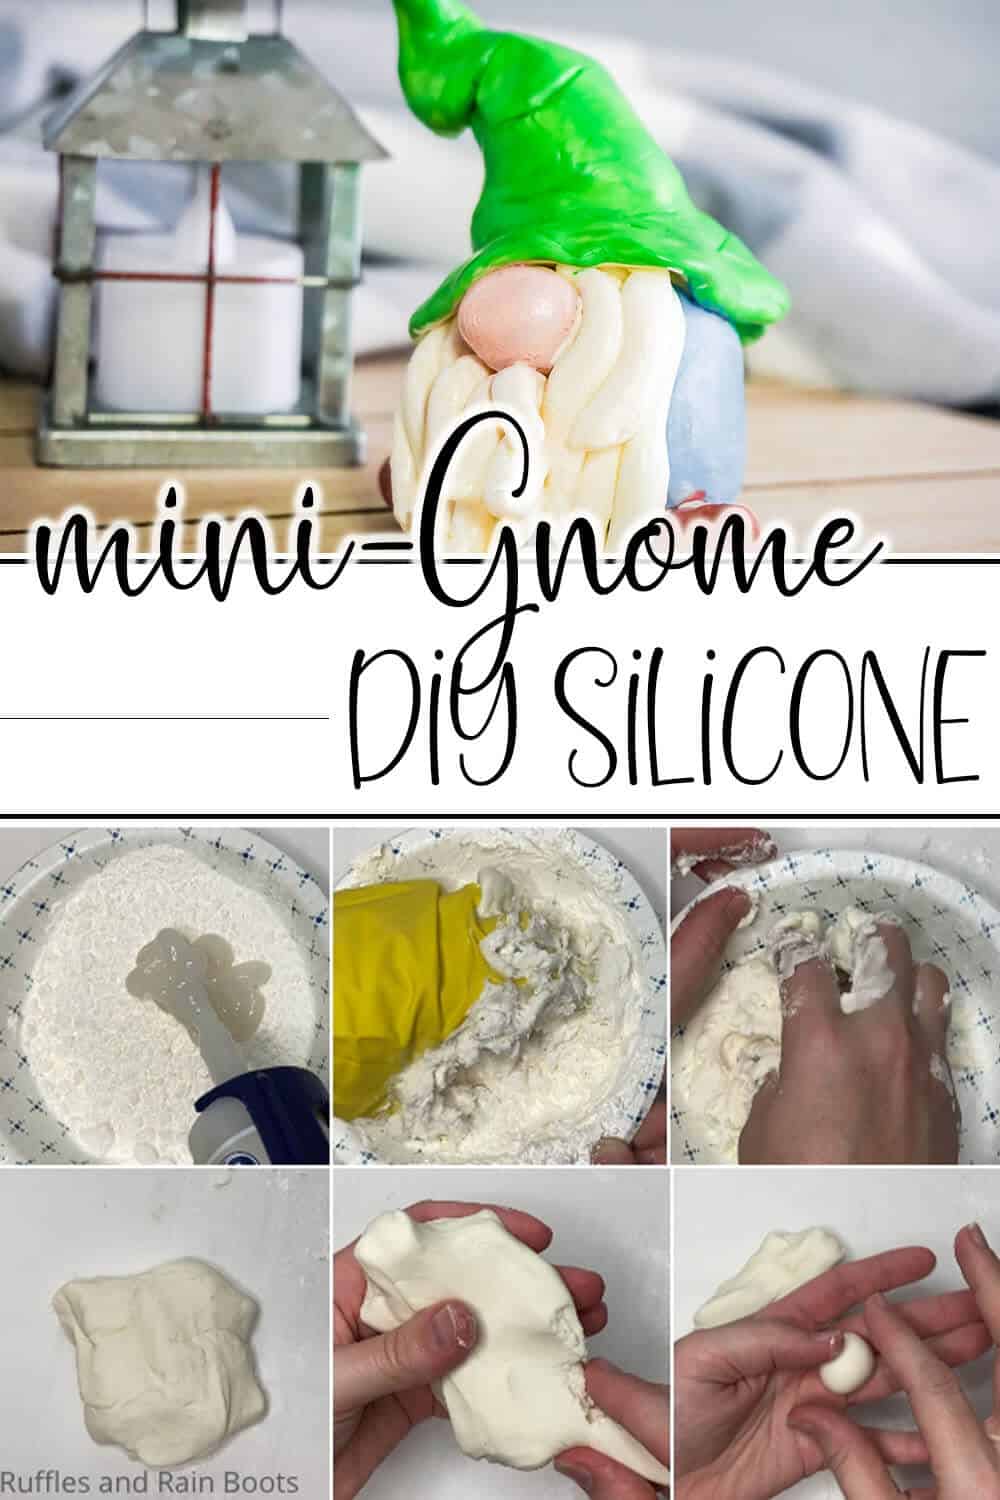 easy diy idea to make a gnome using silicone with text which reads mini-gnome DIY silicone